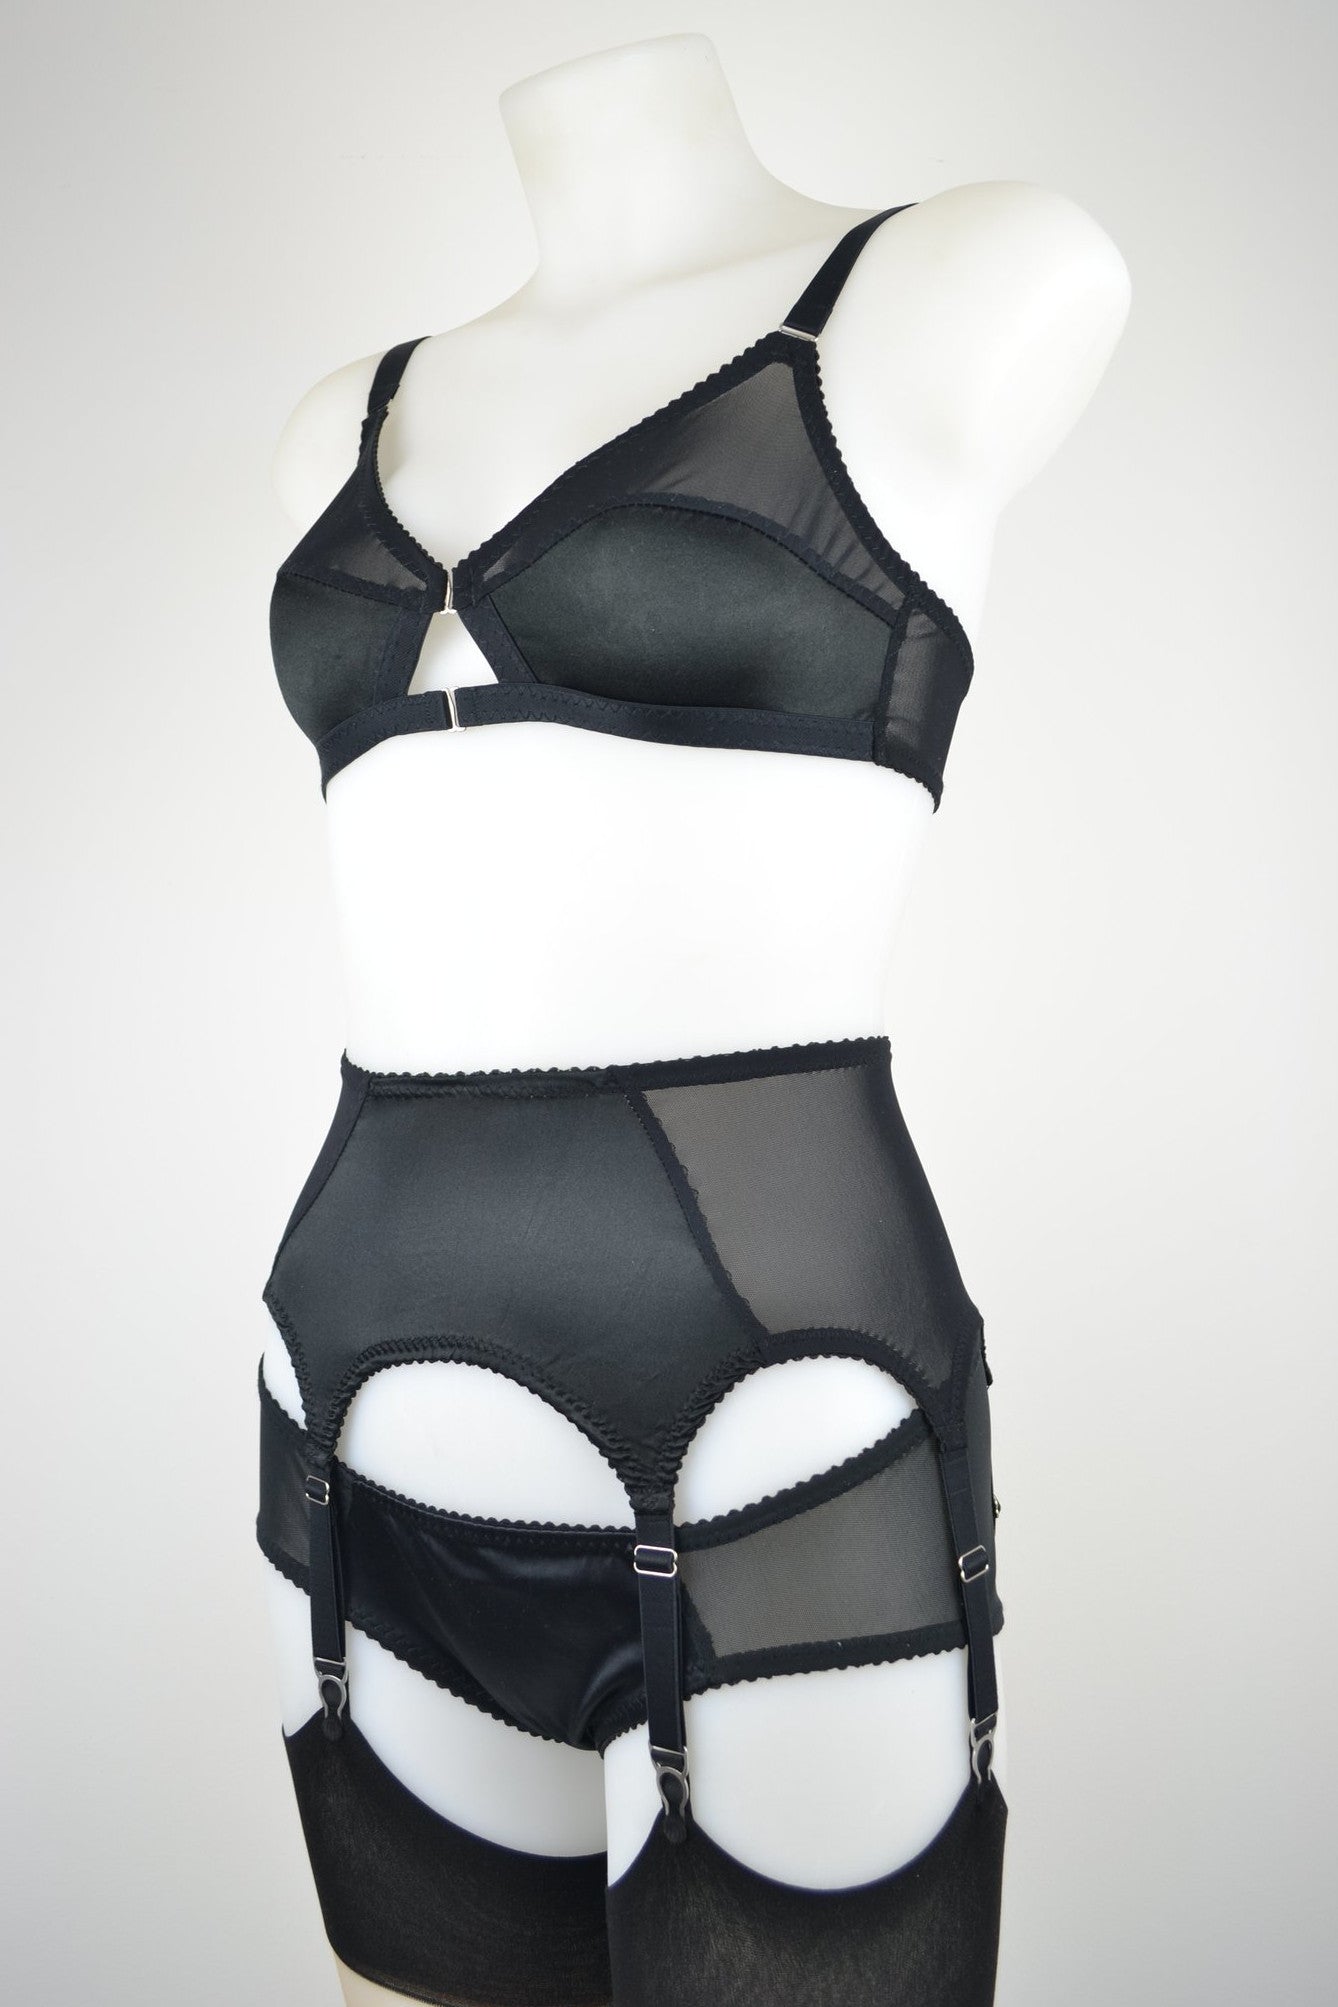 luxury black silk suspender belt lingerie with 6 metal clips. Available in plus size and ethically and sustainably made in the uk by retro and vintage lingerie brand pip and pantalaimon. Transgender non-binary underwear and lingerie